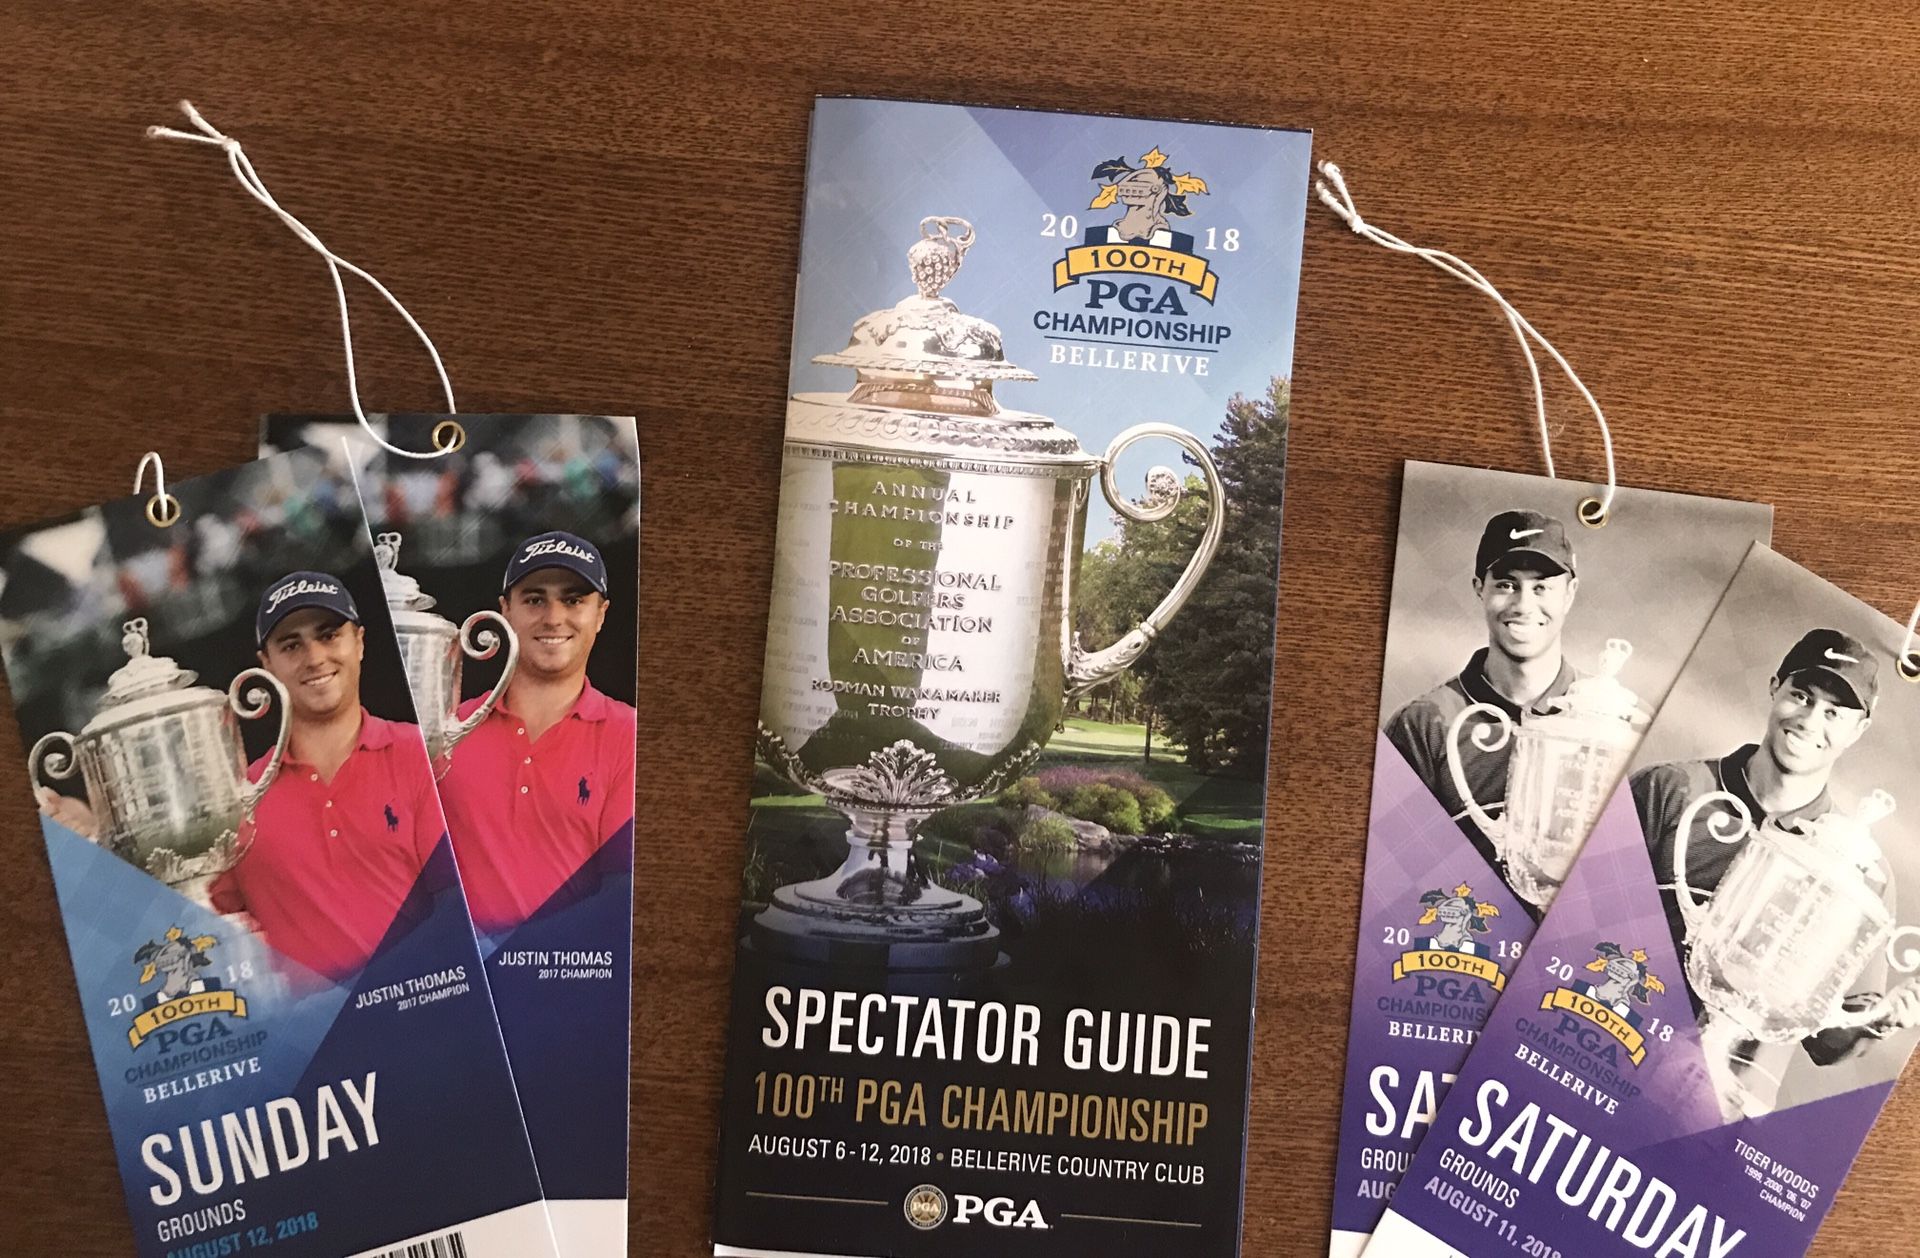 Tickets - 100th PGA Championship August 6-12, 2018 (Saturday and Sunday)